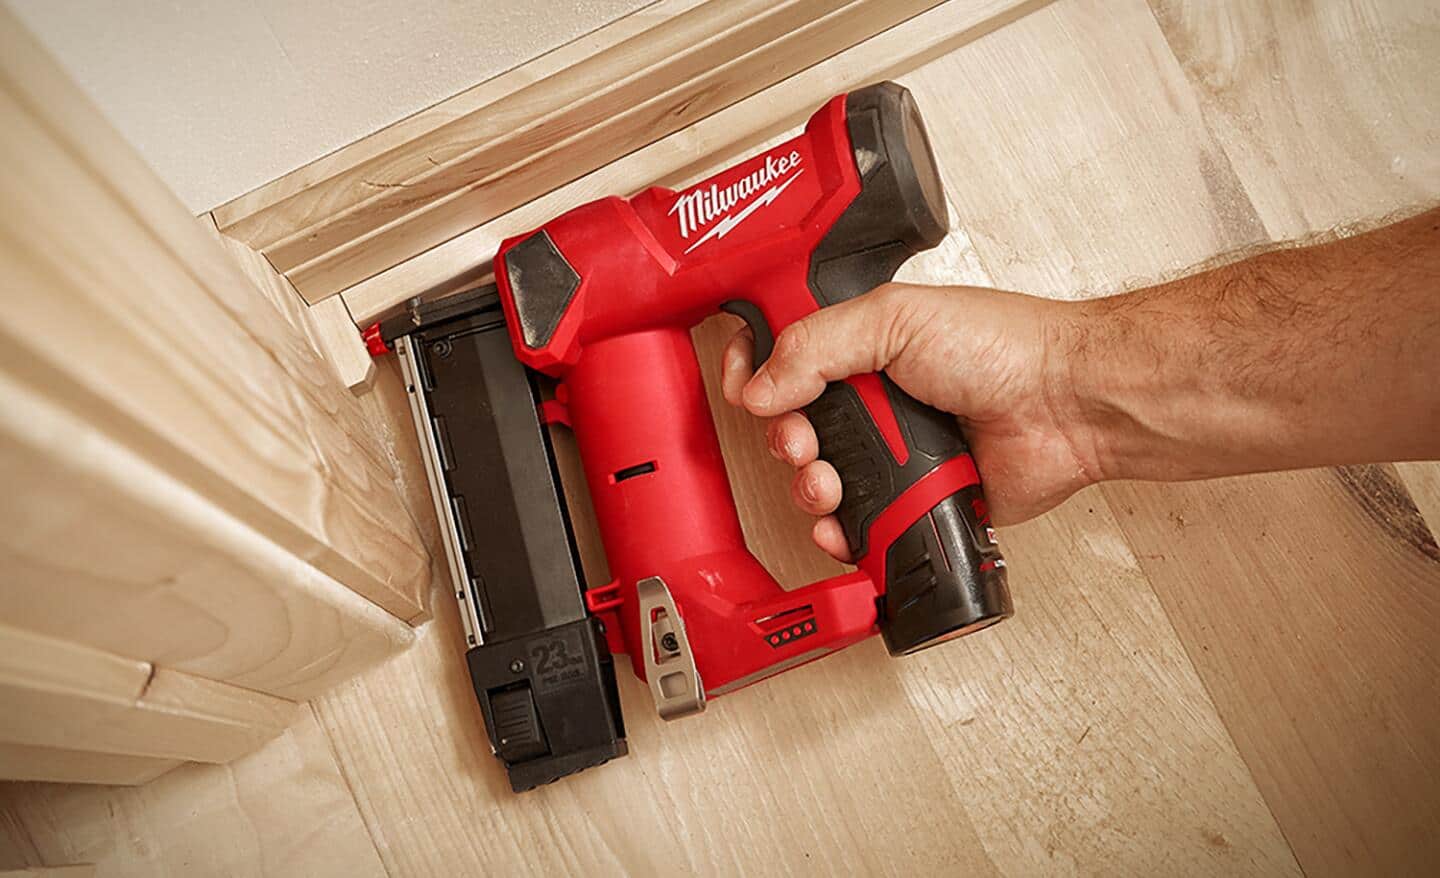 A person uses a cordless pin nailer on a baseboard project.